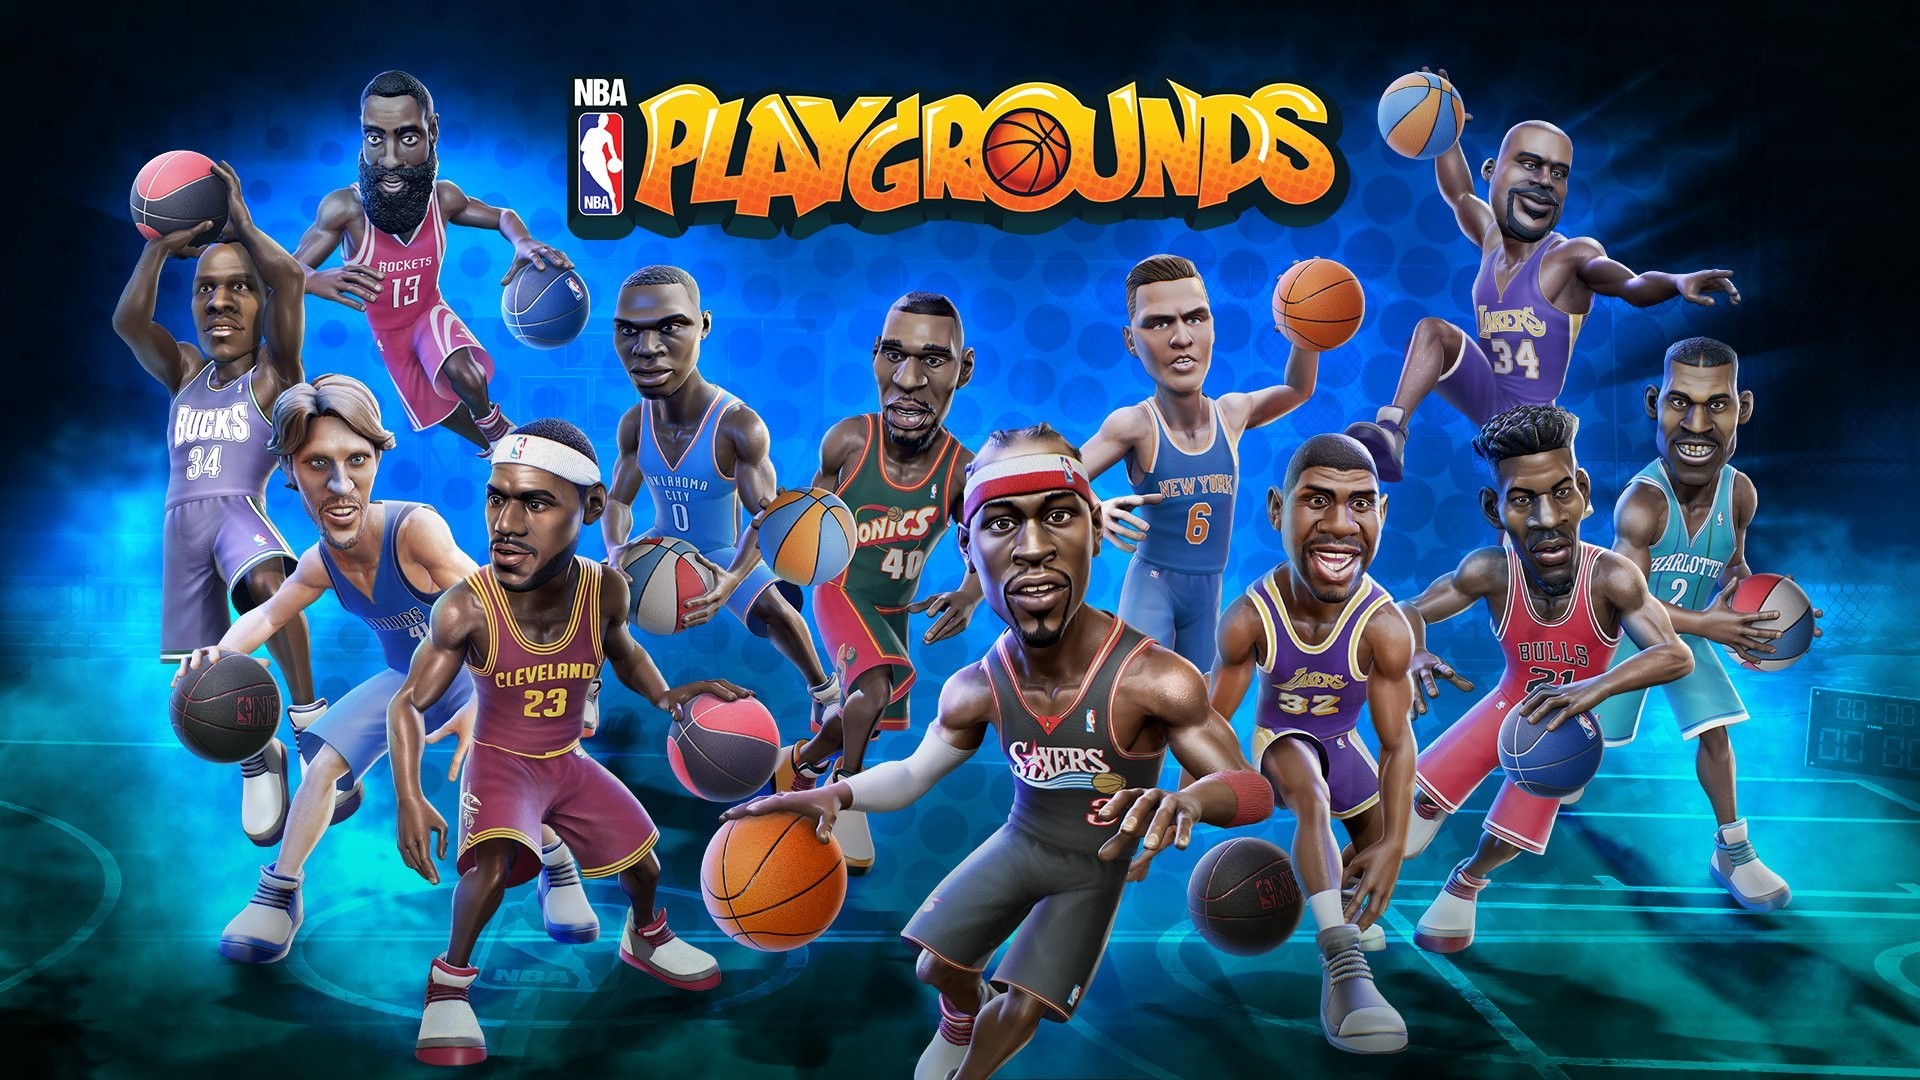 1920x1080 2 NBA Playgrounds HD Wallpapers Backgrounds Wallpaper 